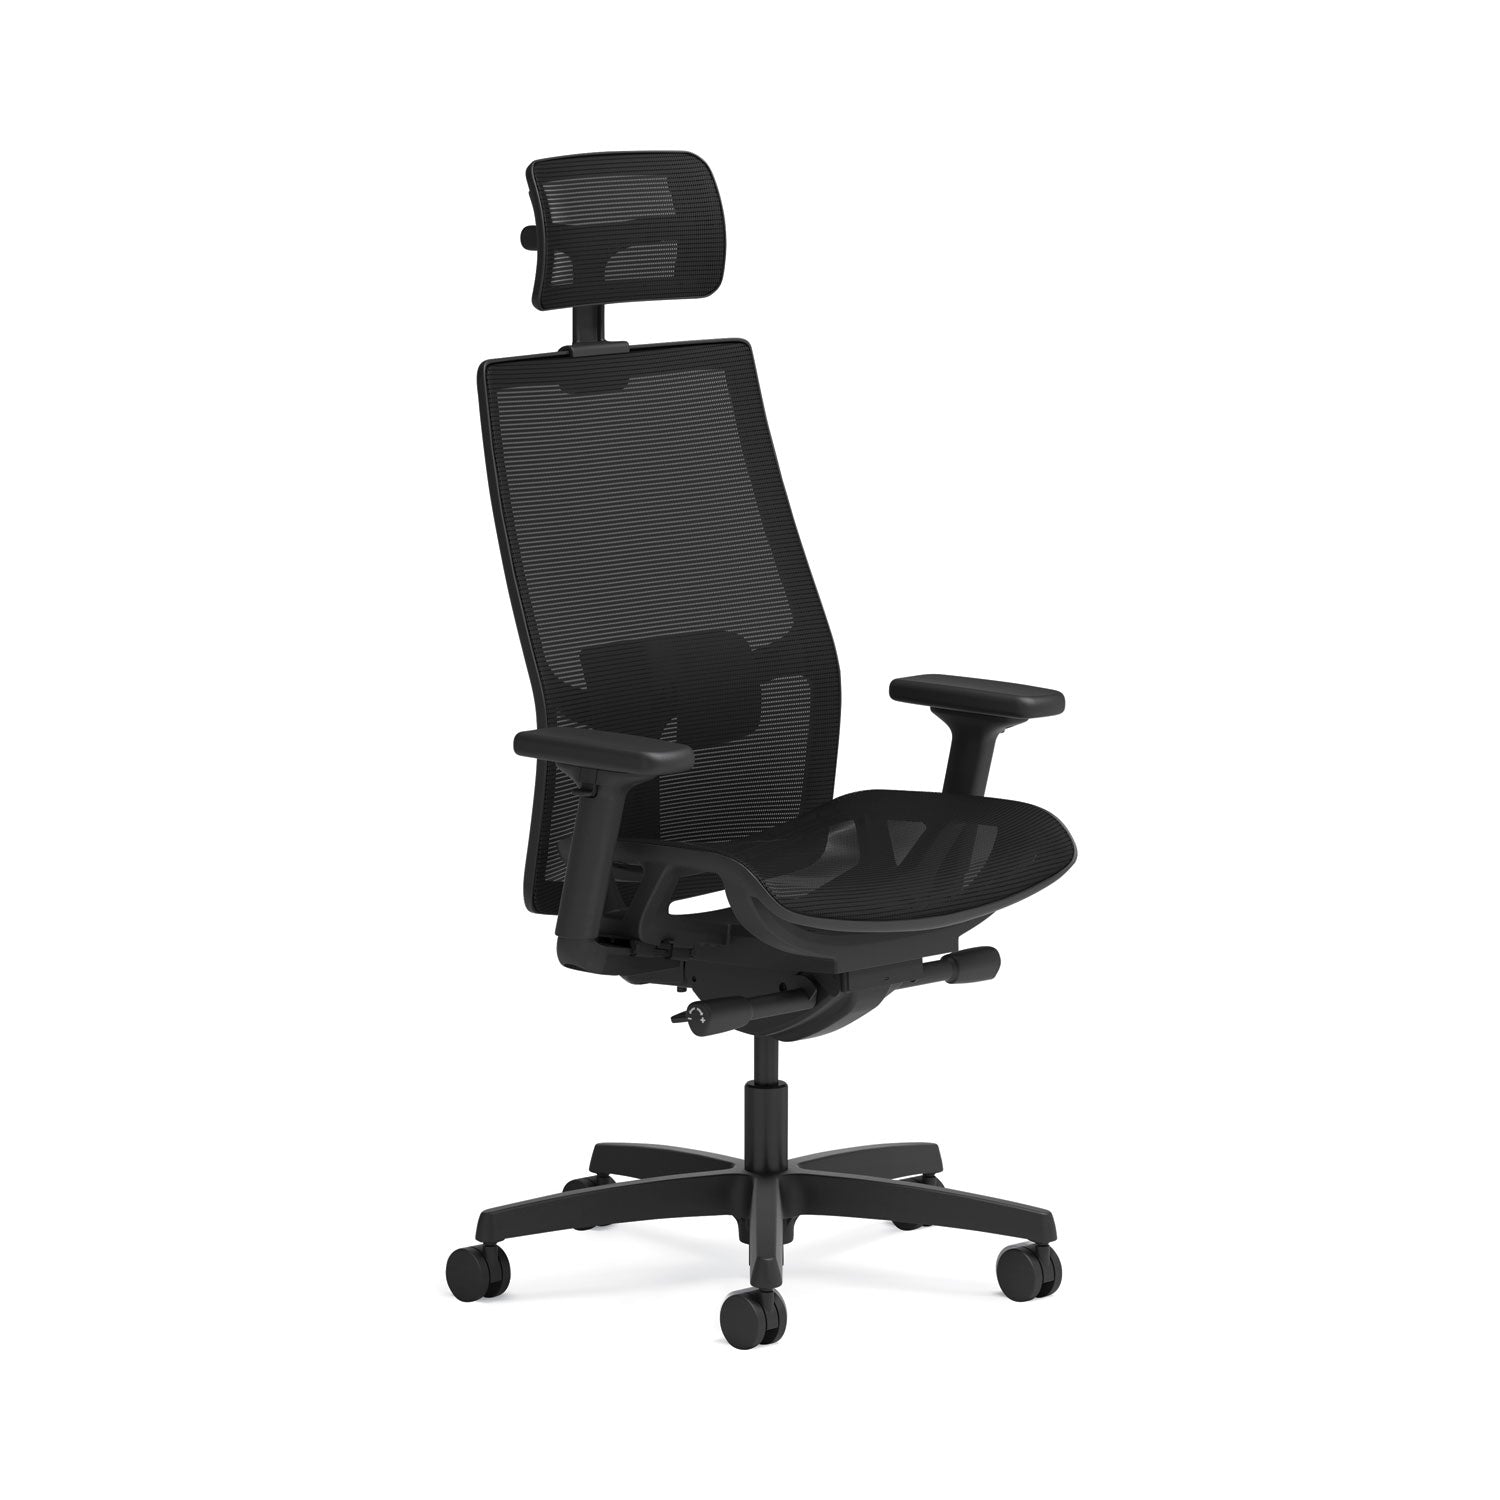 ignition-20-4-way-stretch-mesh-back-and-seat-task-chair-supports-up-to-300-lb-17-to-21-seat-black-seat-black-base_honi2msky2imthr - 1